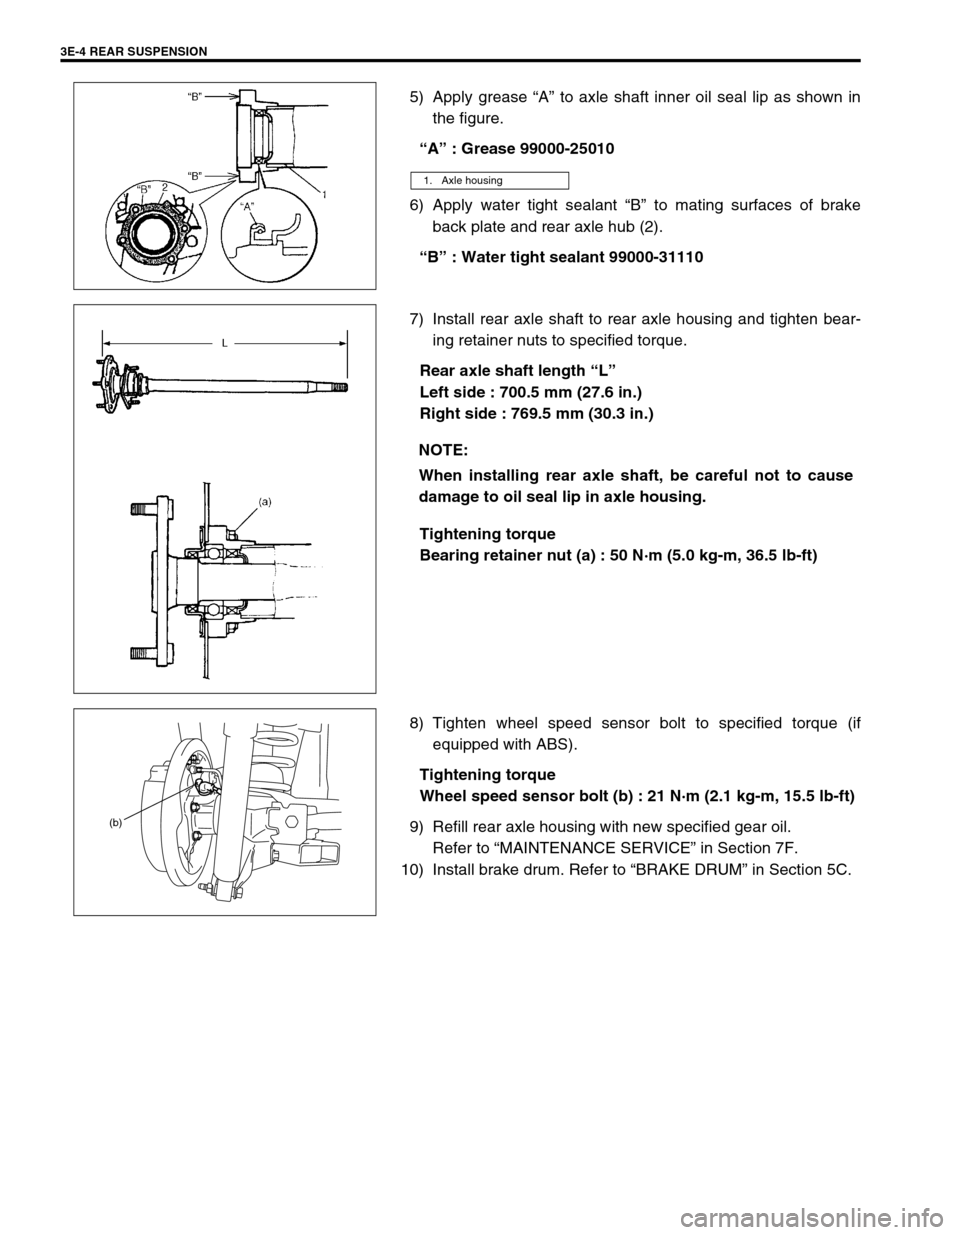 SUZUKI GRAND VITARA 2001 2.G Owners Manual 3E-4 REAR SUSPENSION
5) Apply grease “A” to axle shaft inner oil seal lip as shown in
the figure.
“A” : Grease 99000-25010
6) Apply water tight sealant “B” to mating surfaces of brake
back